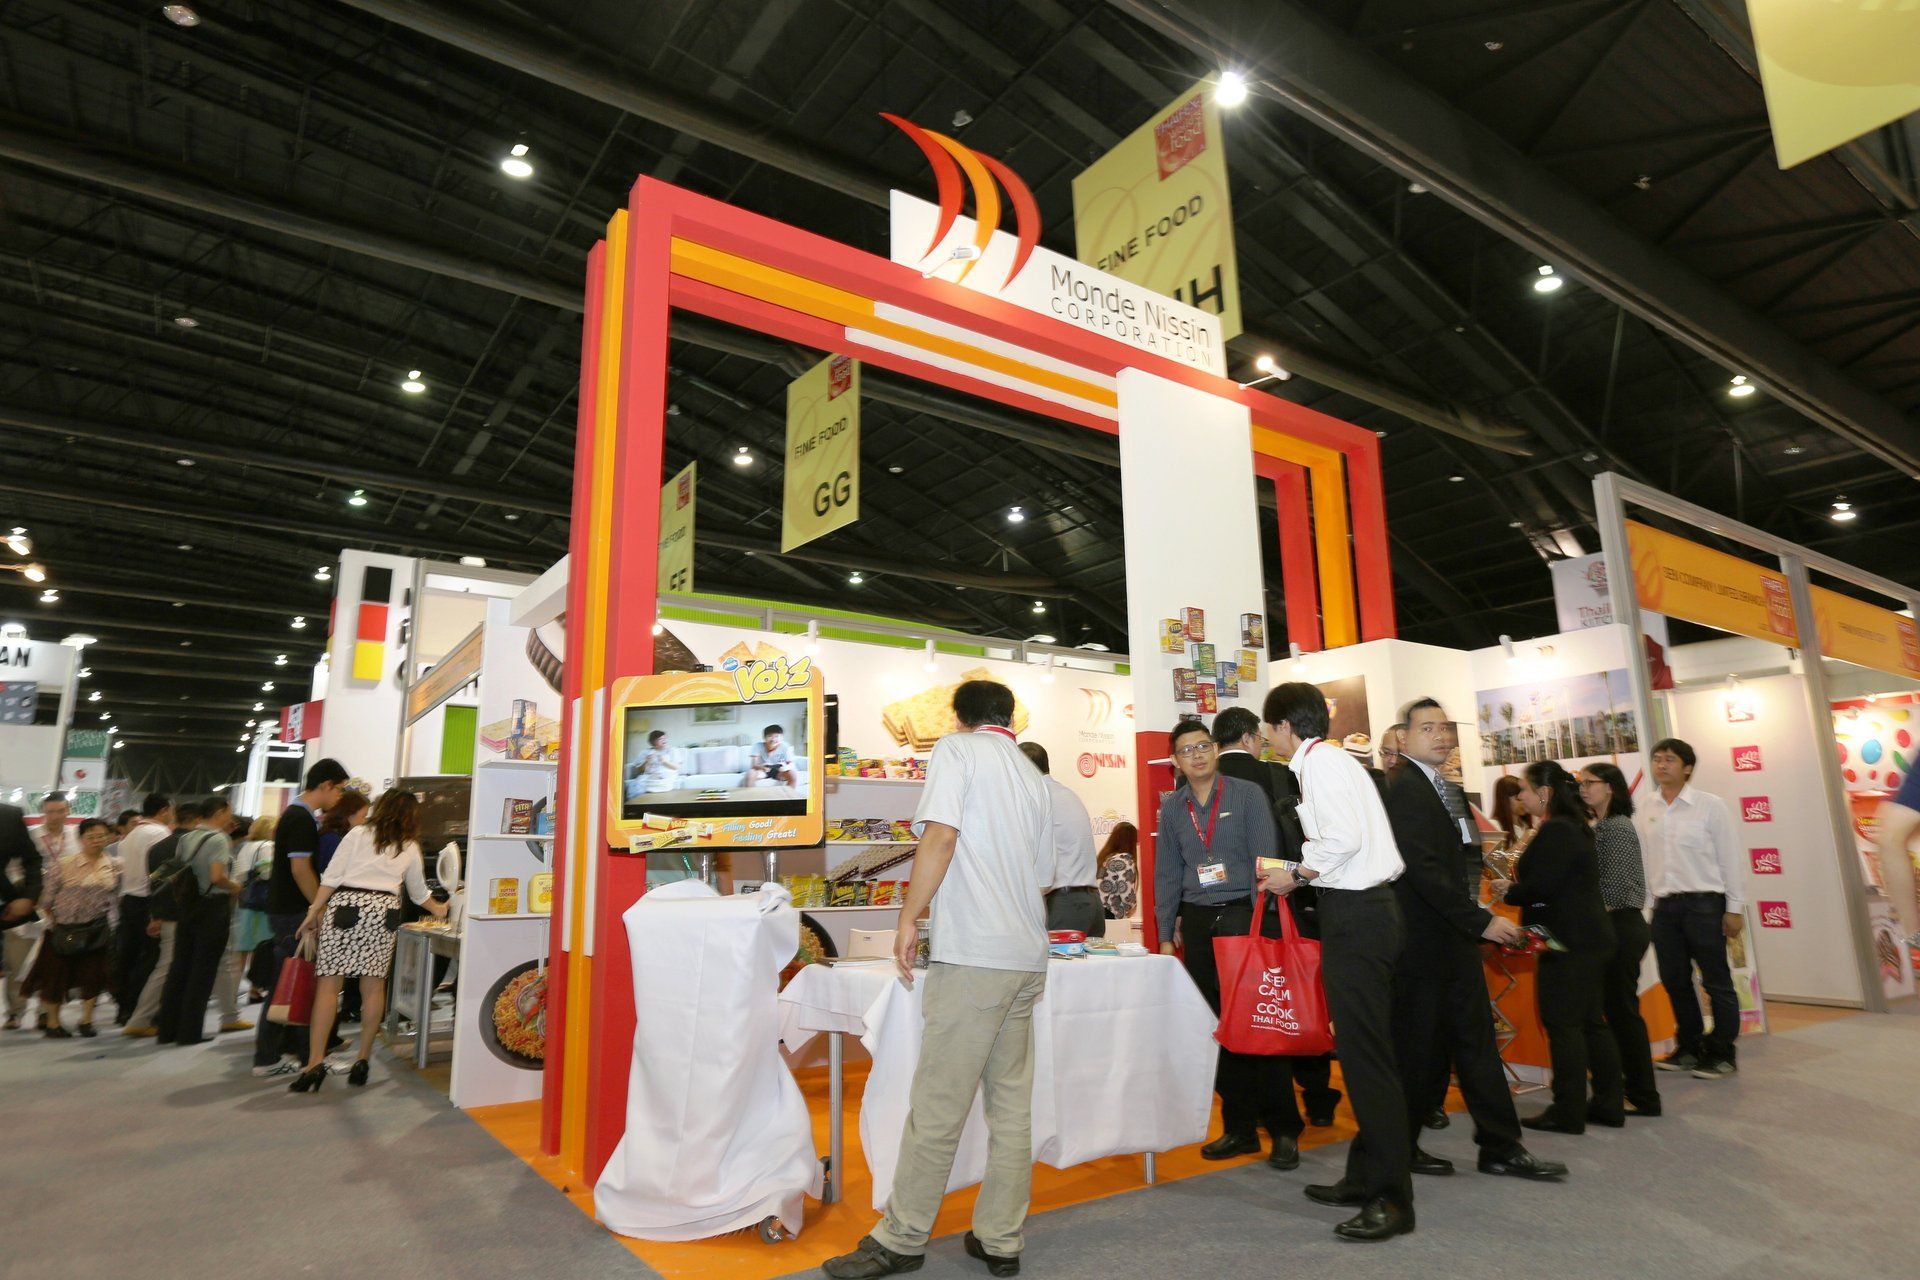 Monde Nissin @ Thaifex 2015. Booth designed and built by Essential Global Fairs.